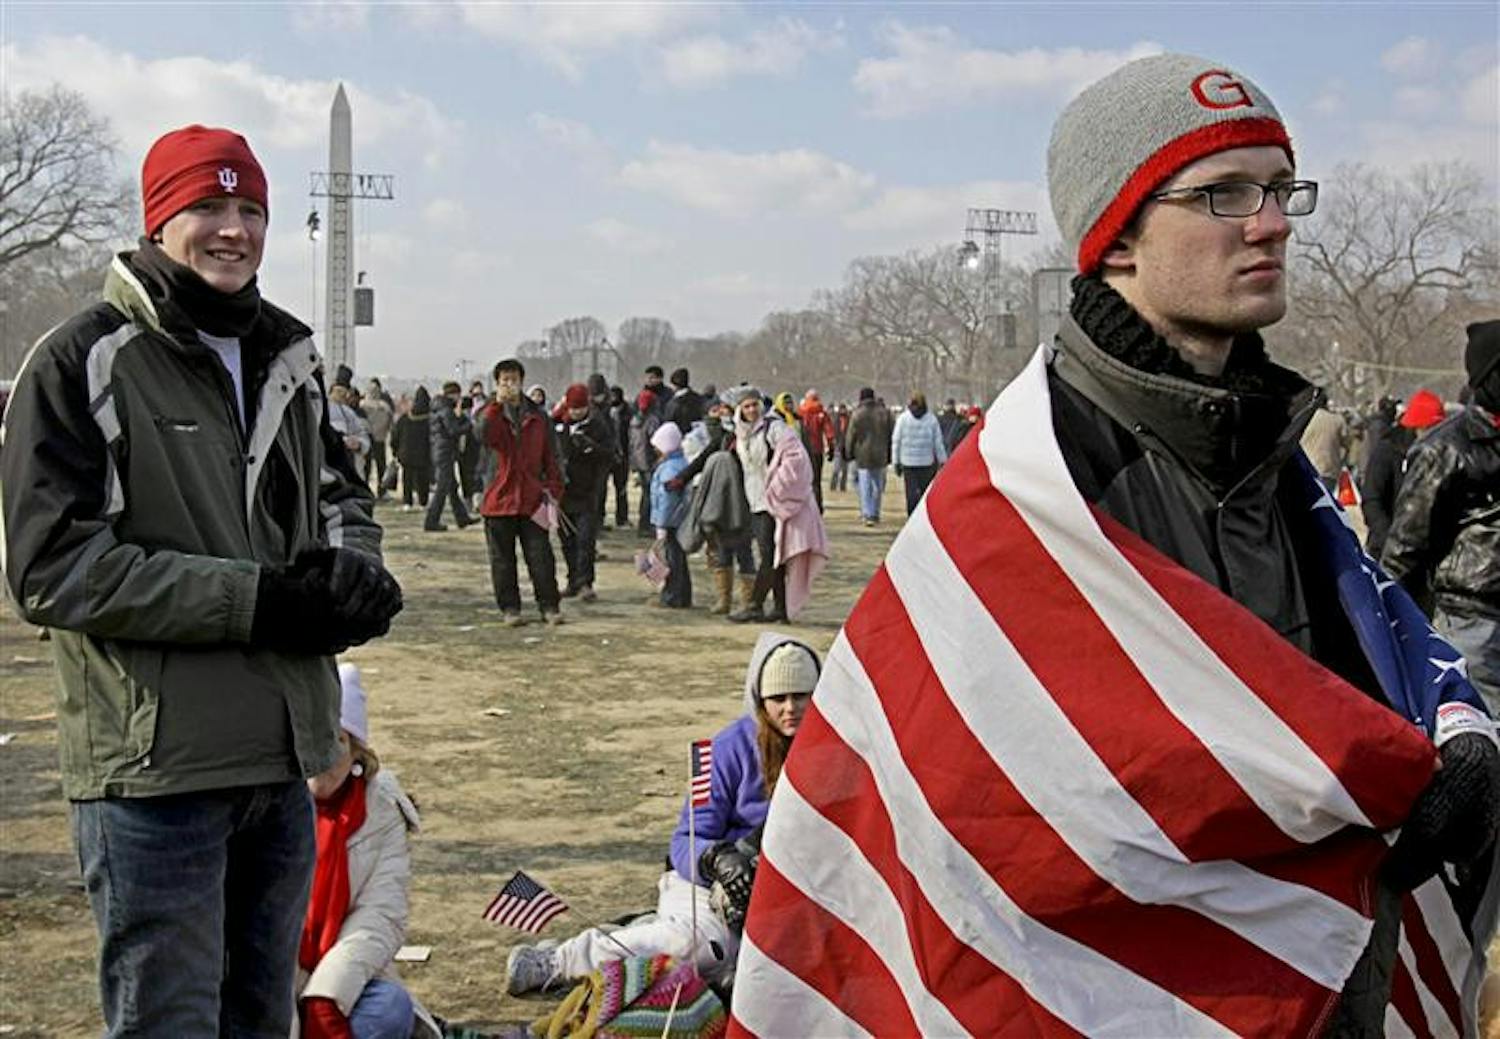 IU juniors Andrew and David Murto look at the Capitol after Obama's speech Tuesday afternoon in Washington.